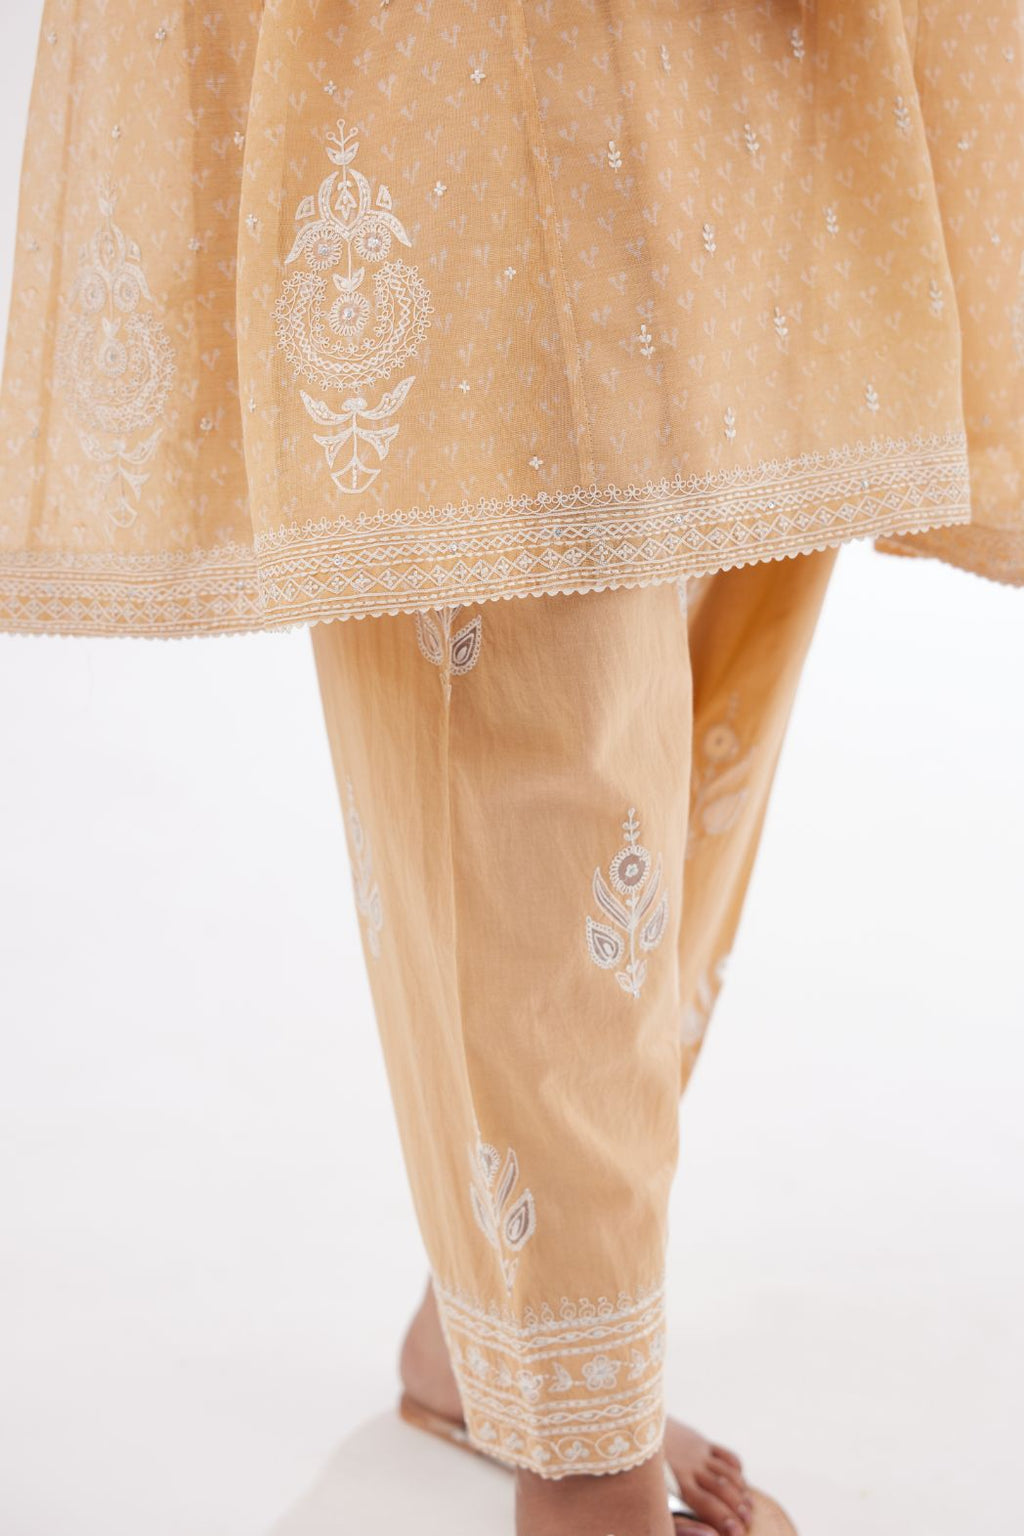 Peach cotton chanderi hand block printed short kalidar phiran style kurta with button placket neckline and dori and silk thraed embroidery all over.